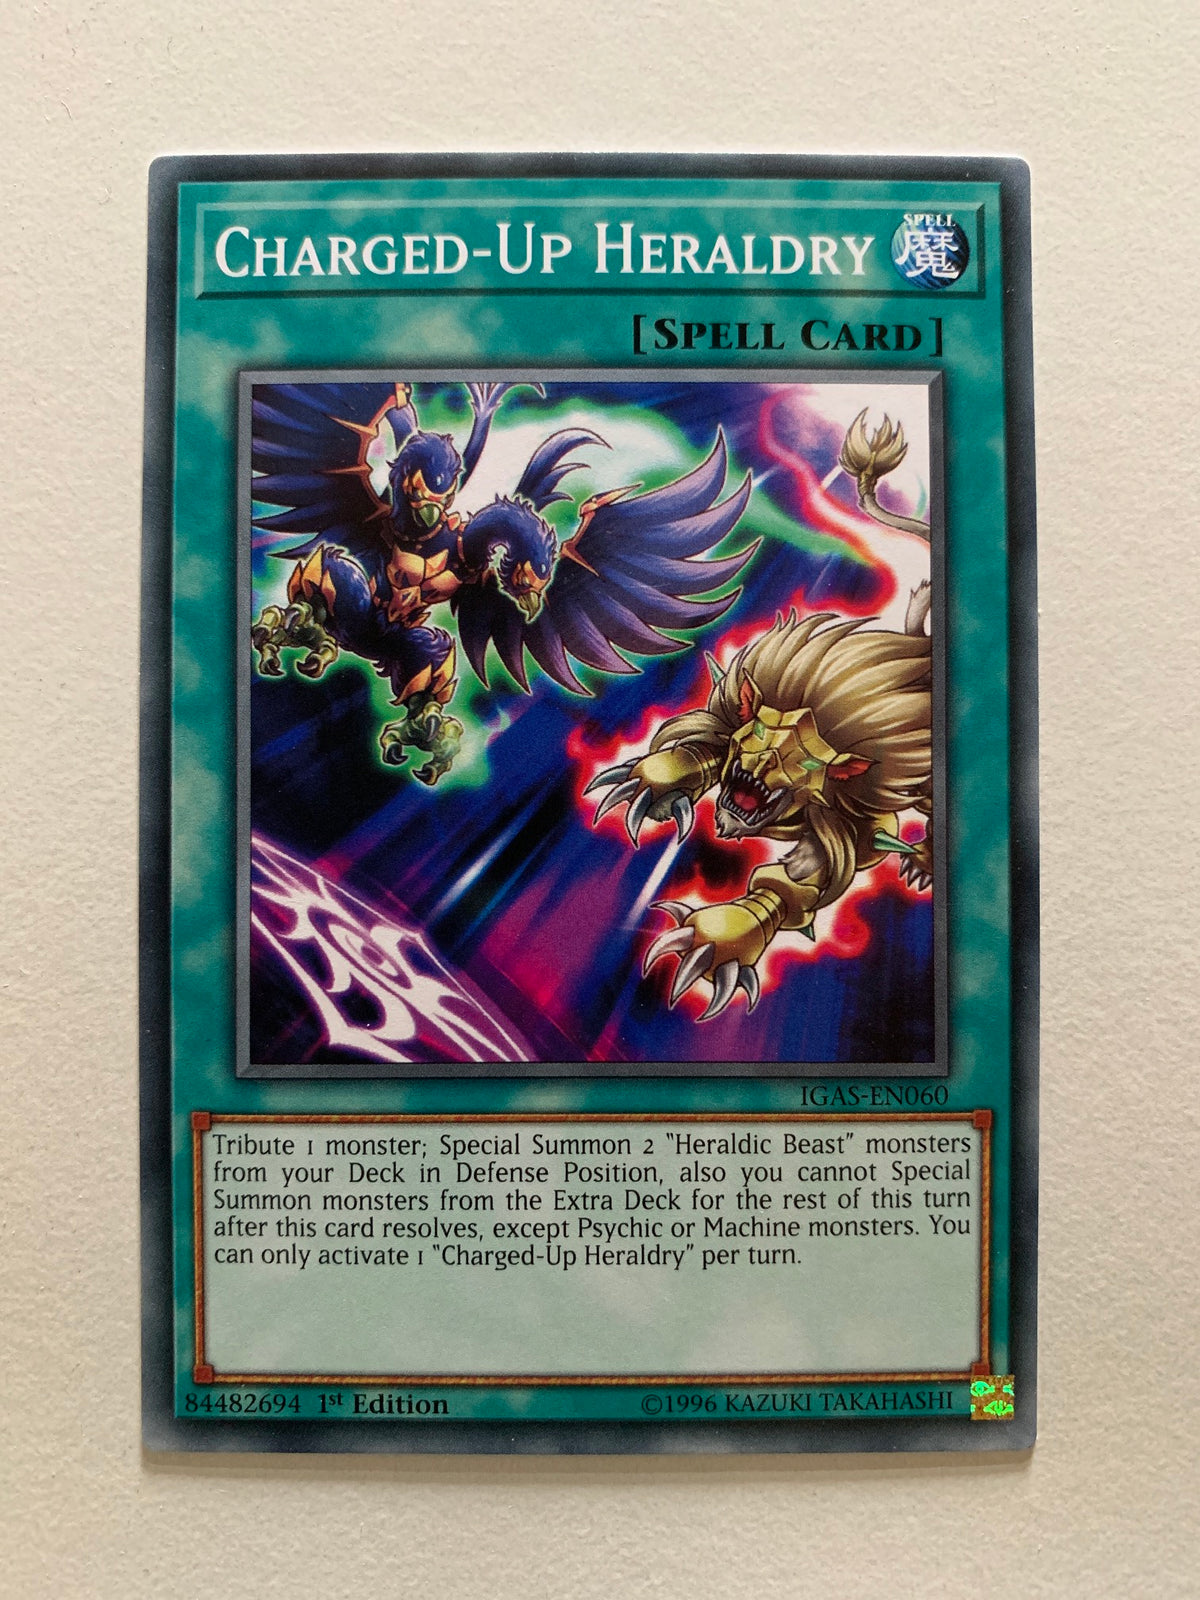 CHARGED UP HERALDRY (M/NM)